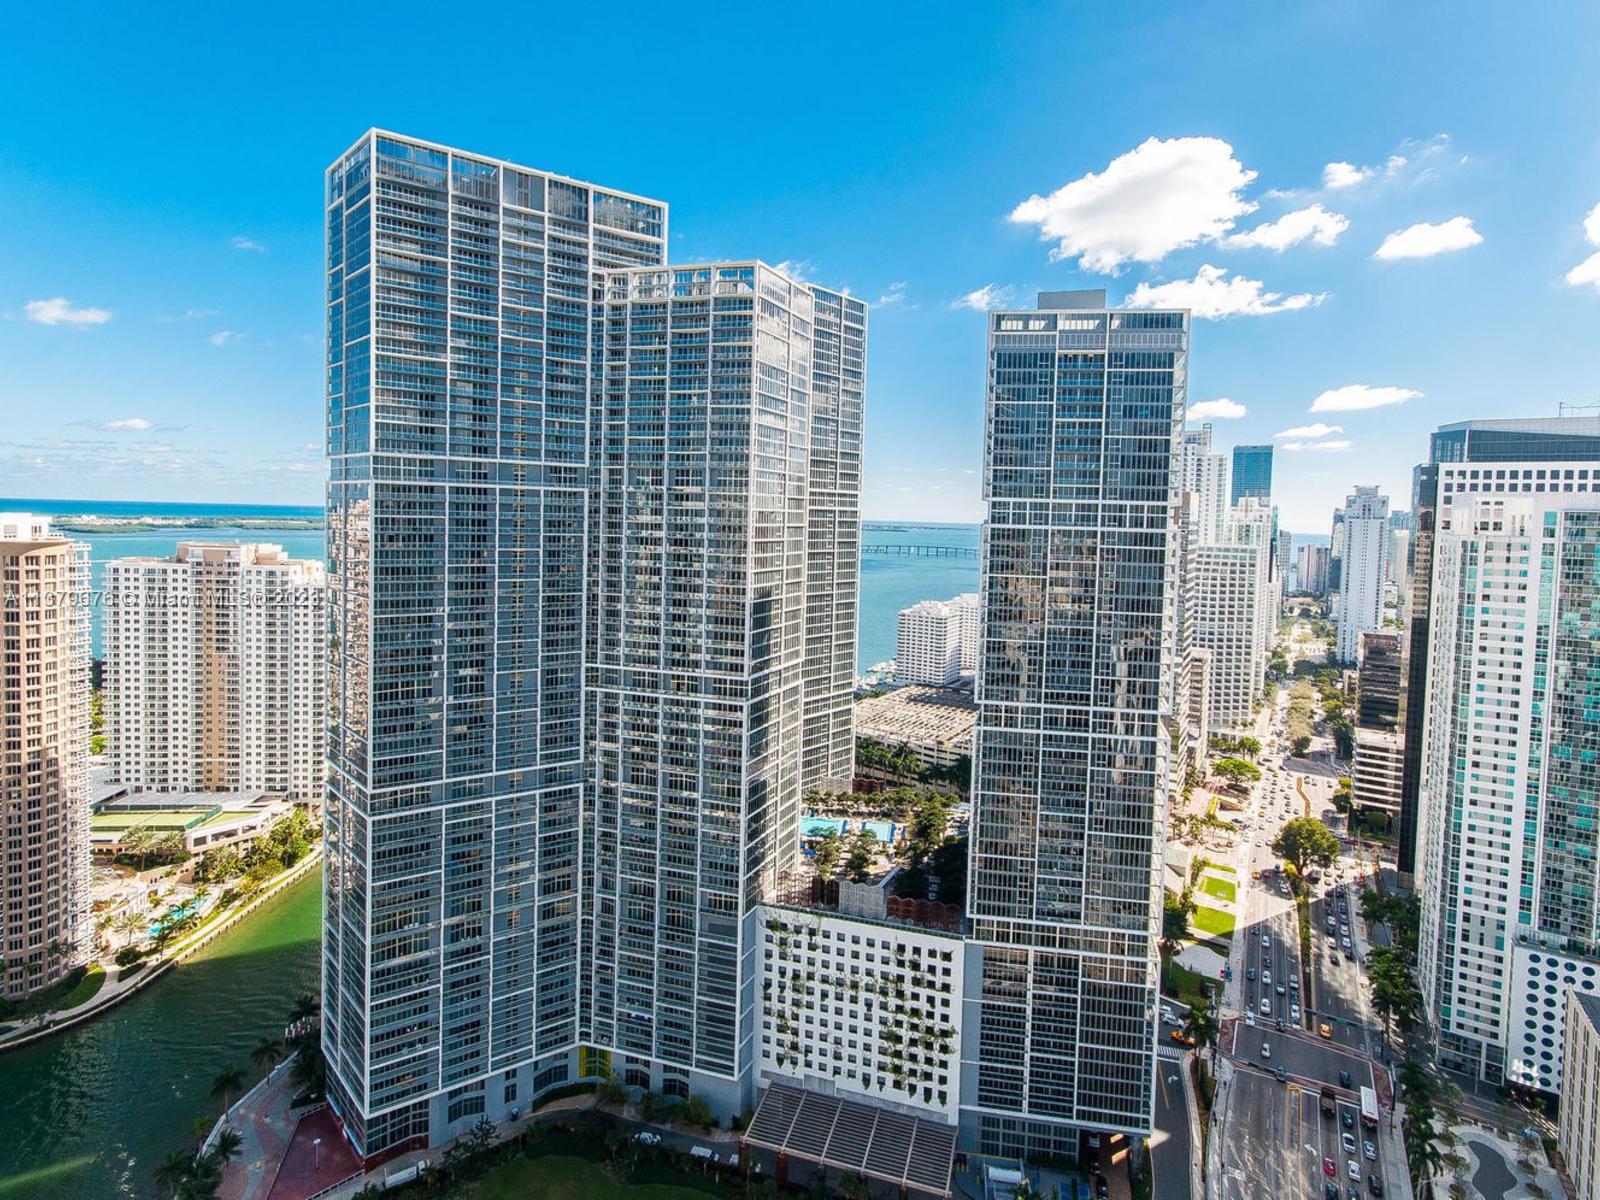 Step inside this stunning 2-bed, 2-bath corner unit with floor-to-ceiling windows in Icon Brickell Tower One. Enjoy breathtaking views of the Miami city skyline, the  Miami River, and Downtown Miami from the high-floor vantage point. The unit boasts top-of-the-line features such as a Sub-zero refrigerator, Wolf-kitchen appliances, and Italian cabinetry. Amenities include a full-service spa, concierge, and valet service. Stay active with a state-of-the-art gym with classes 2-acre pool deck perfect for relaxing and soaking up the Florida sun. , or indulge in a spa treatment at the full-service spa. And with on-site restaurants Cipriani and Cantina La Viente, you'll never have to go far. Located in one of Brickell's most exciting and desirable addresses, this unit is sure to impress!